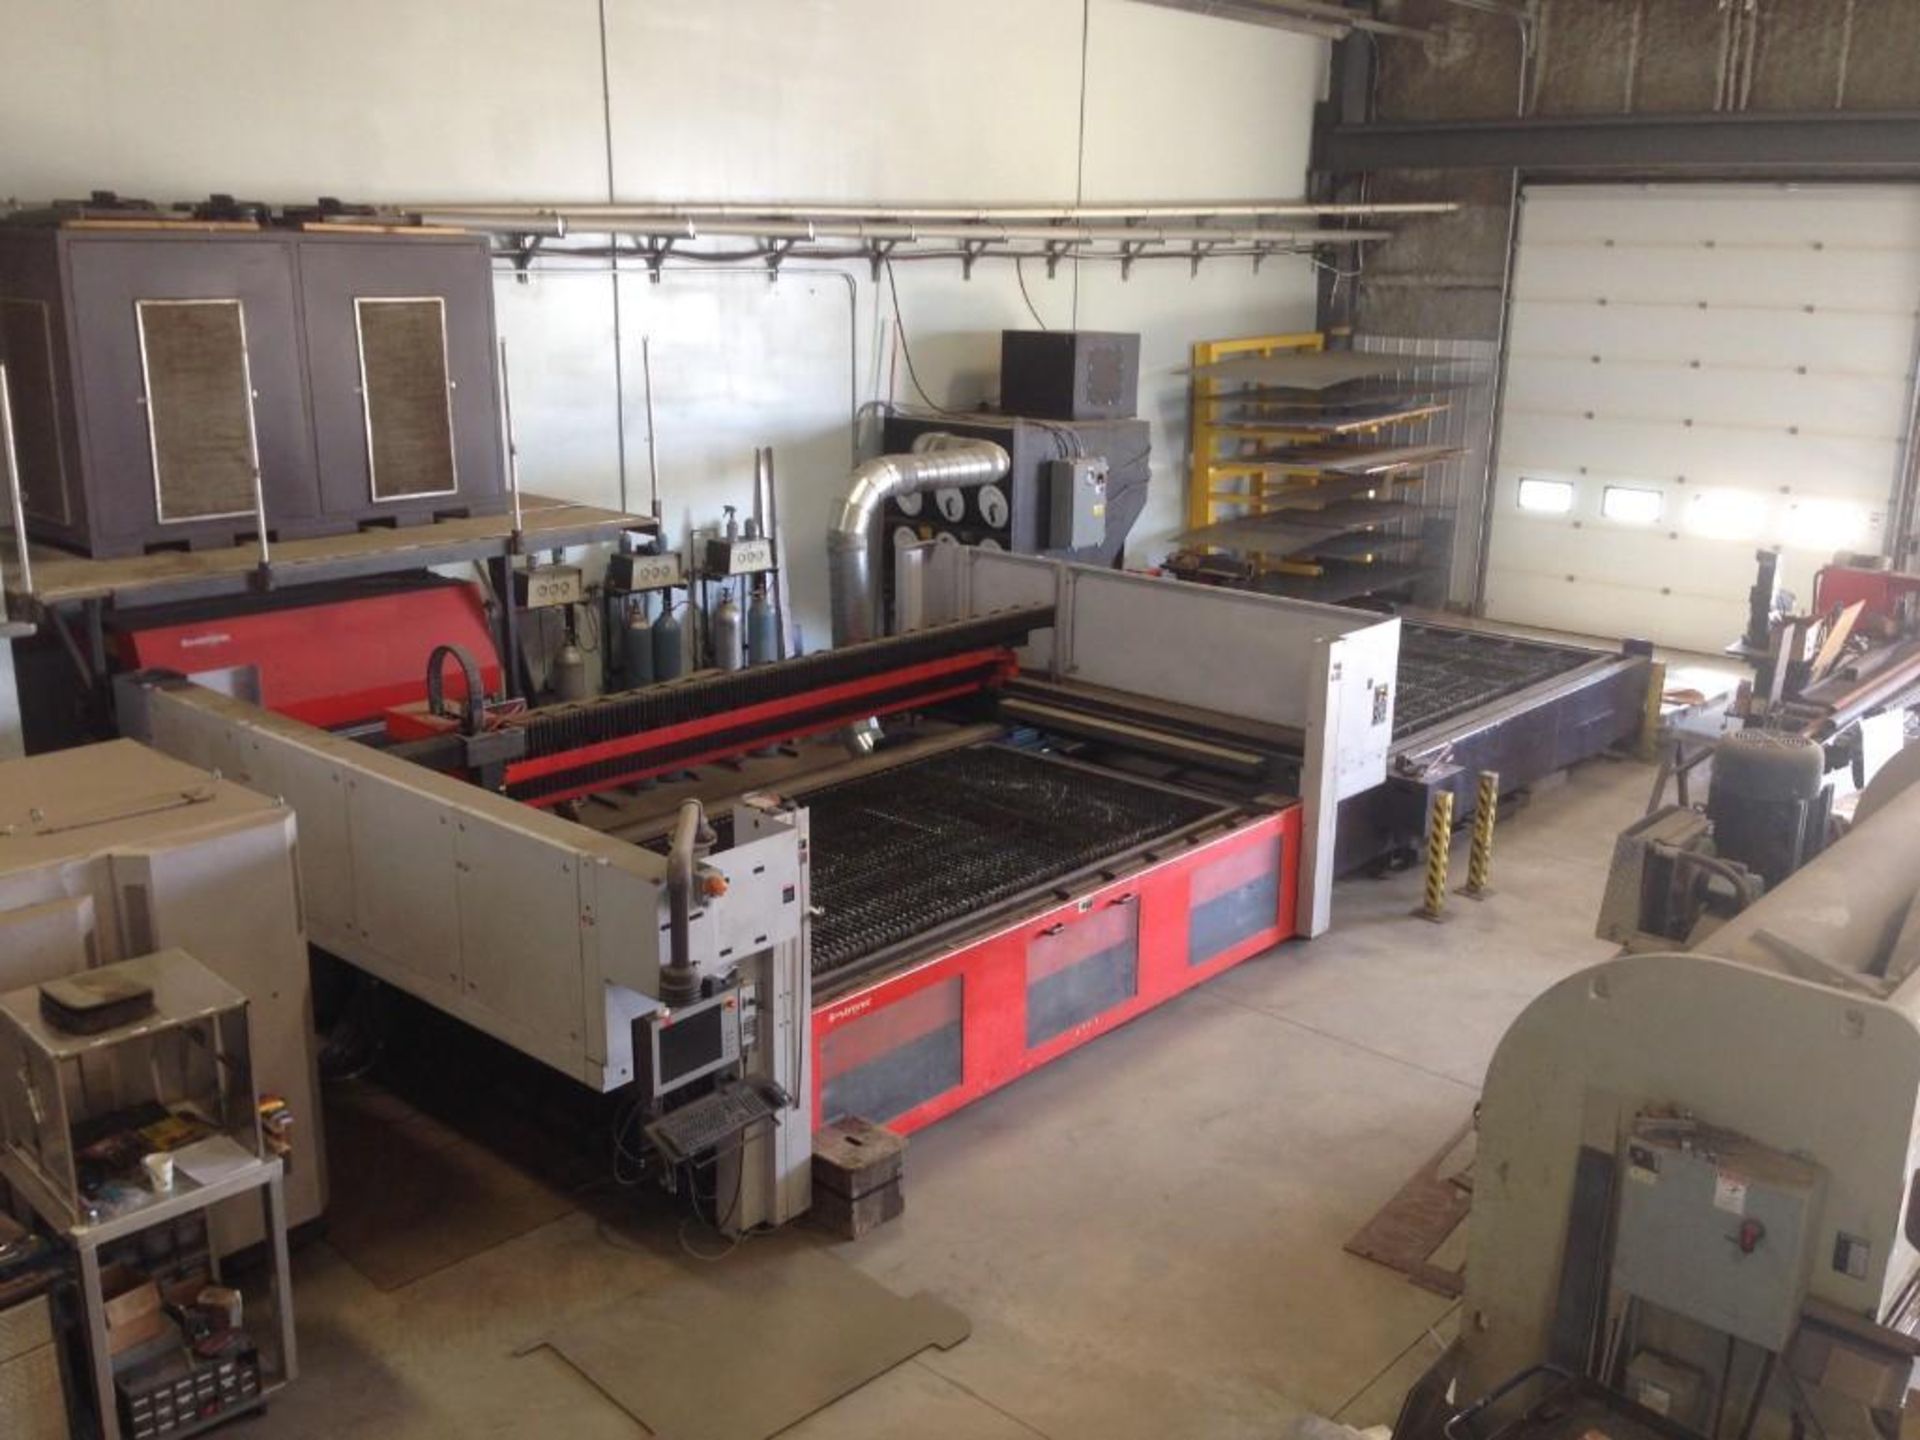 2008 Bystronic Bystar 4020 w/ 2008 ByLaser 6000 Laser Cutting System. Bed Size: 80" x 160" - Image 42 of 45